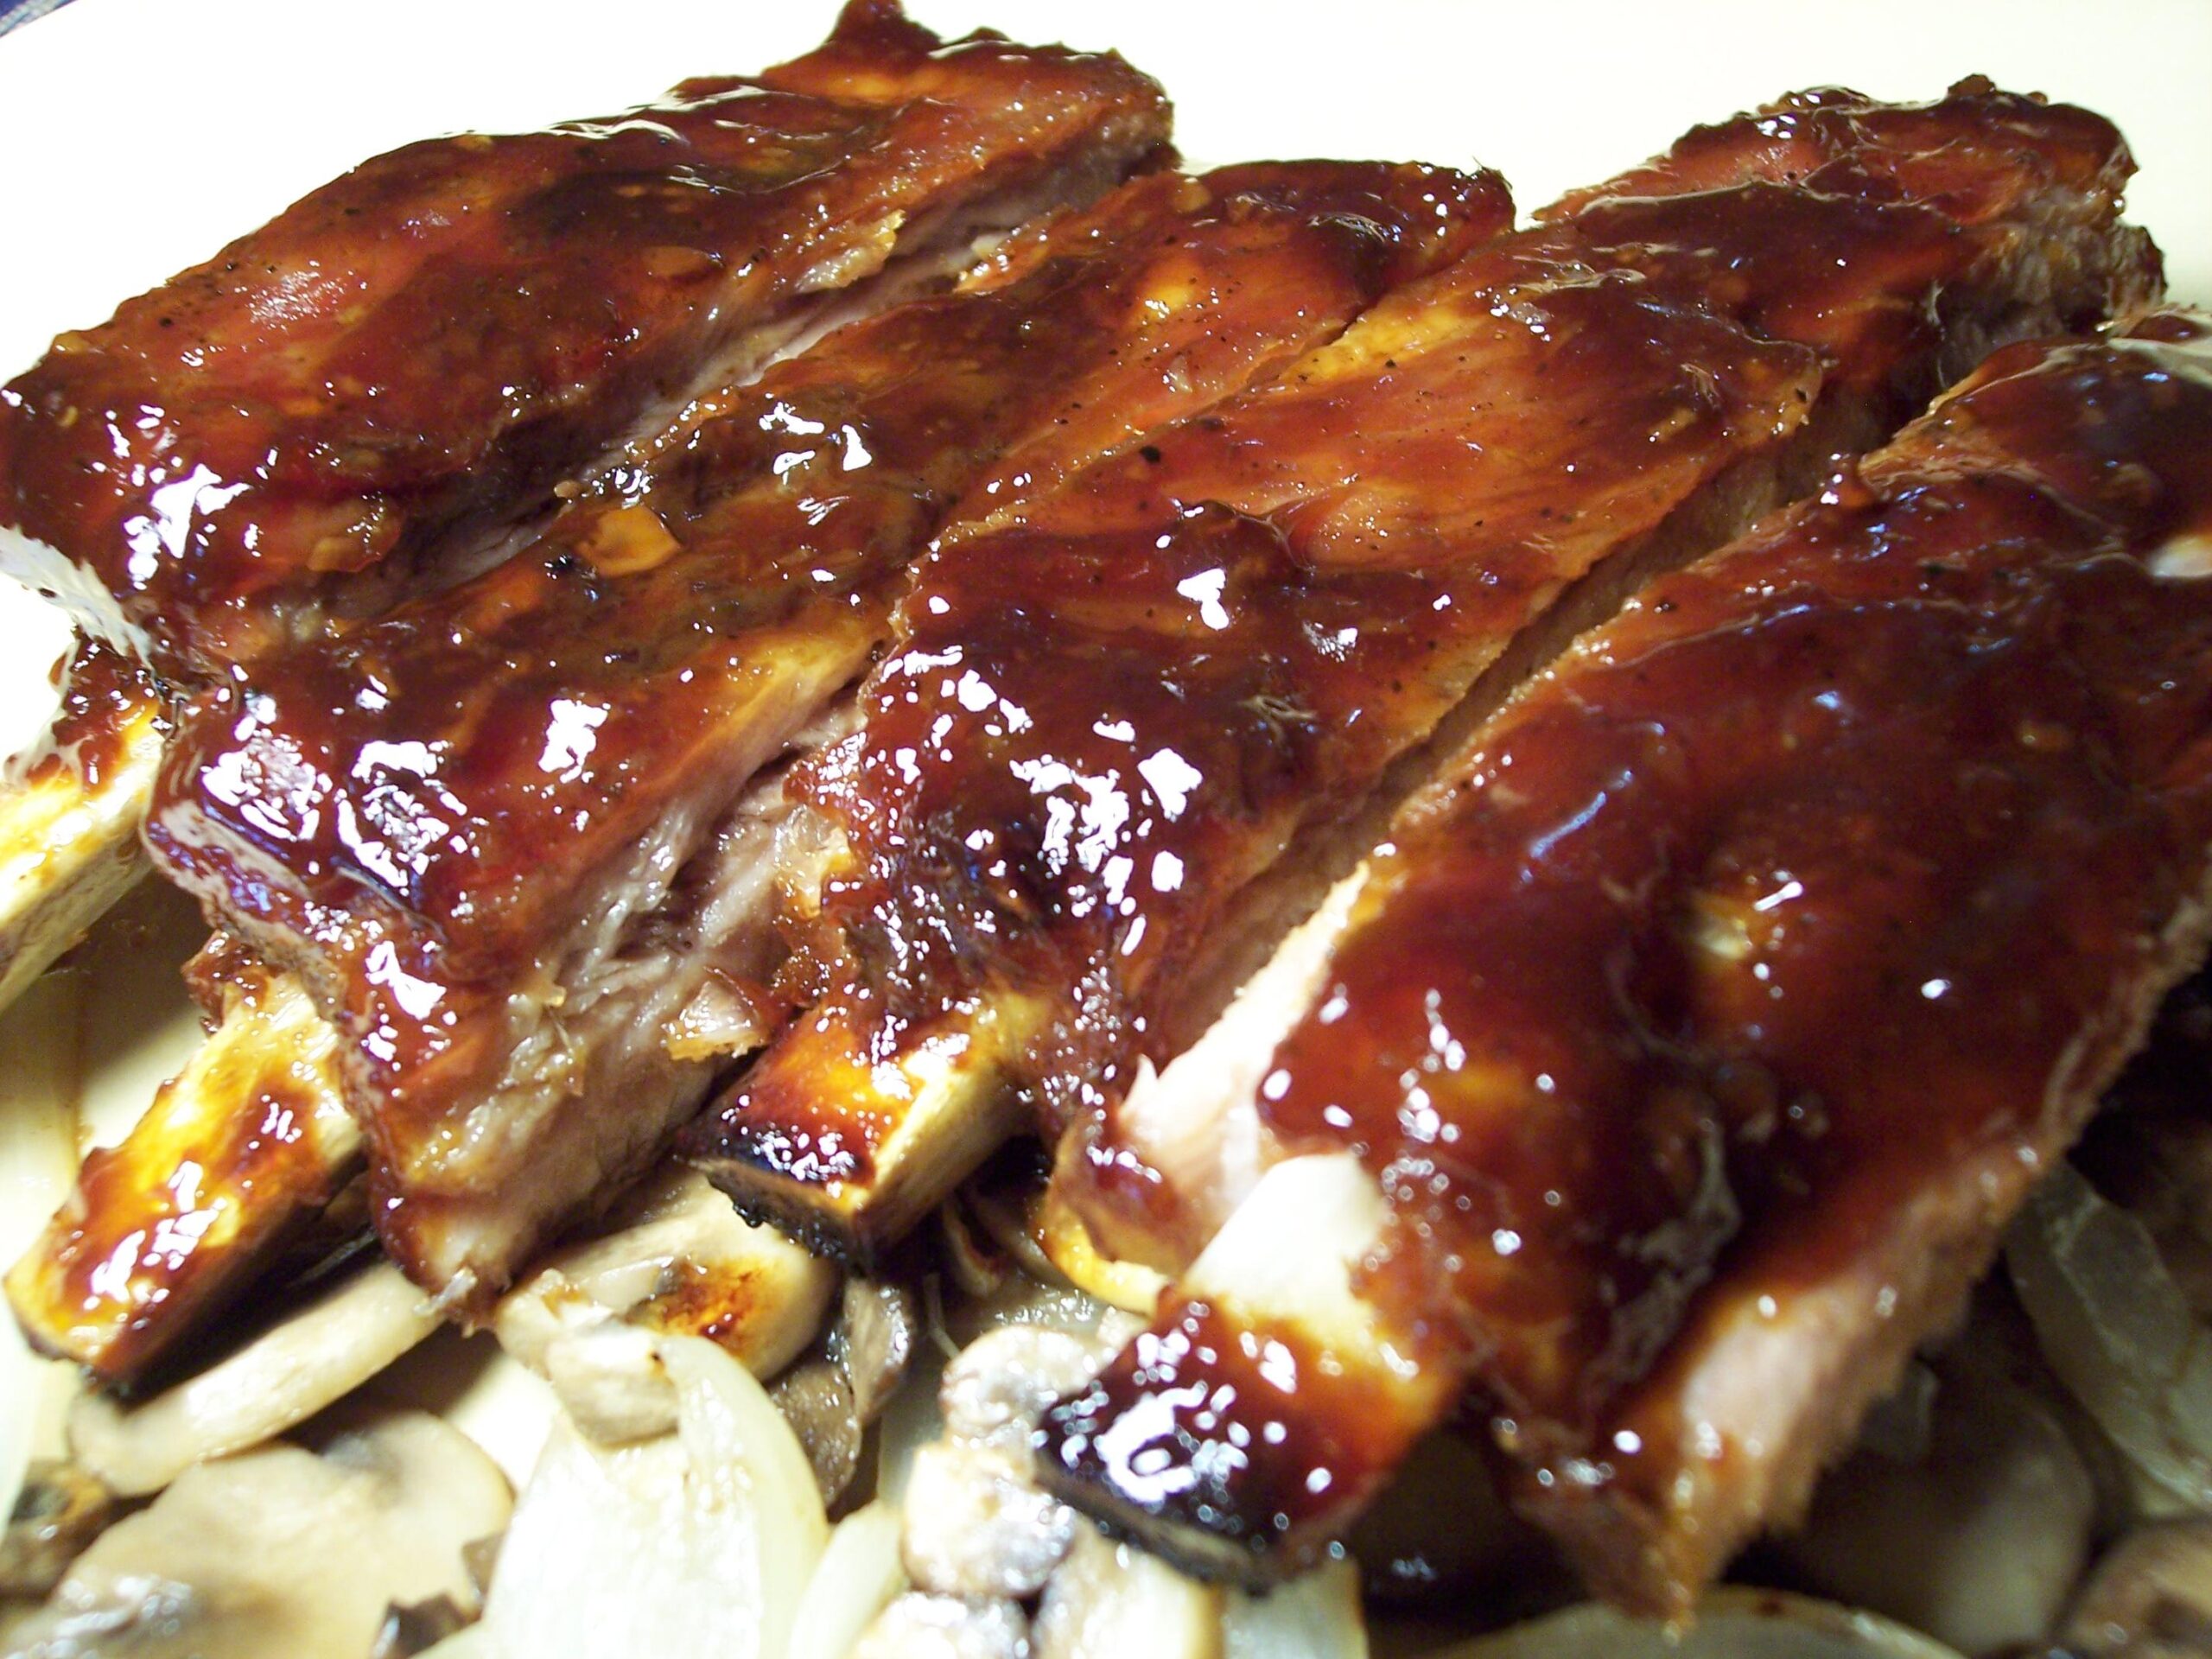  Mouth-watering Baby Back Ribs with a zesty Espresso BBQ sauce that packs a punch!